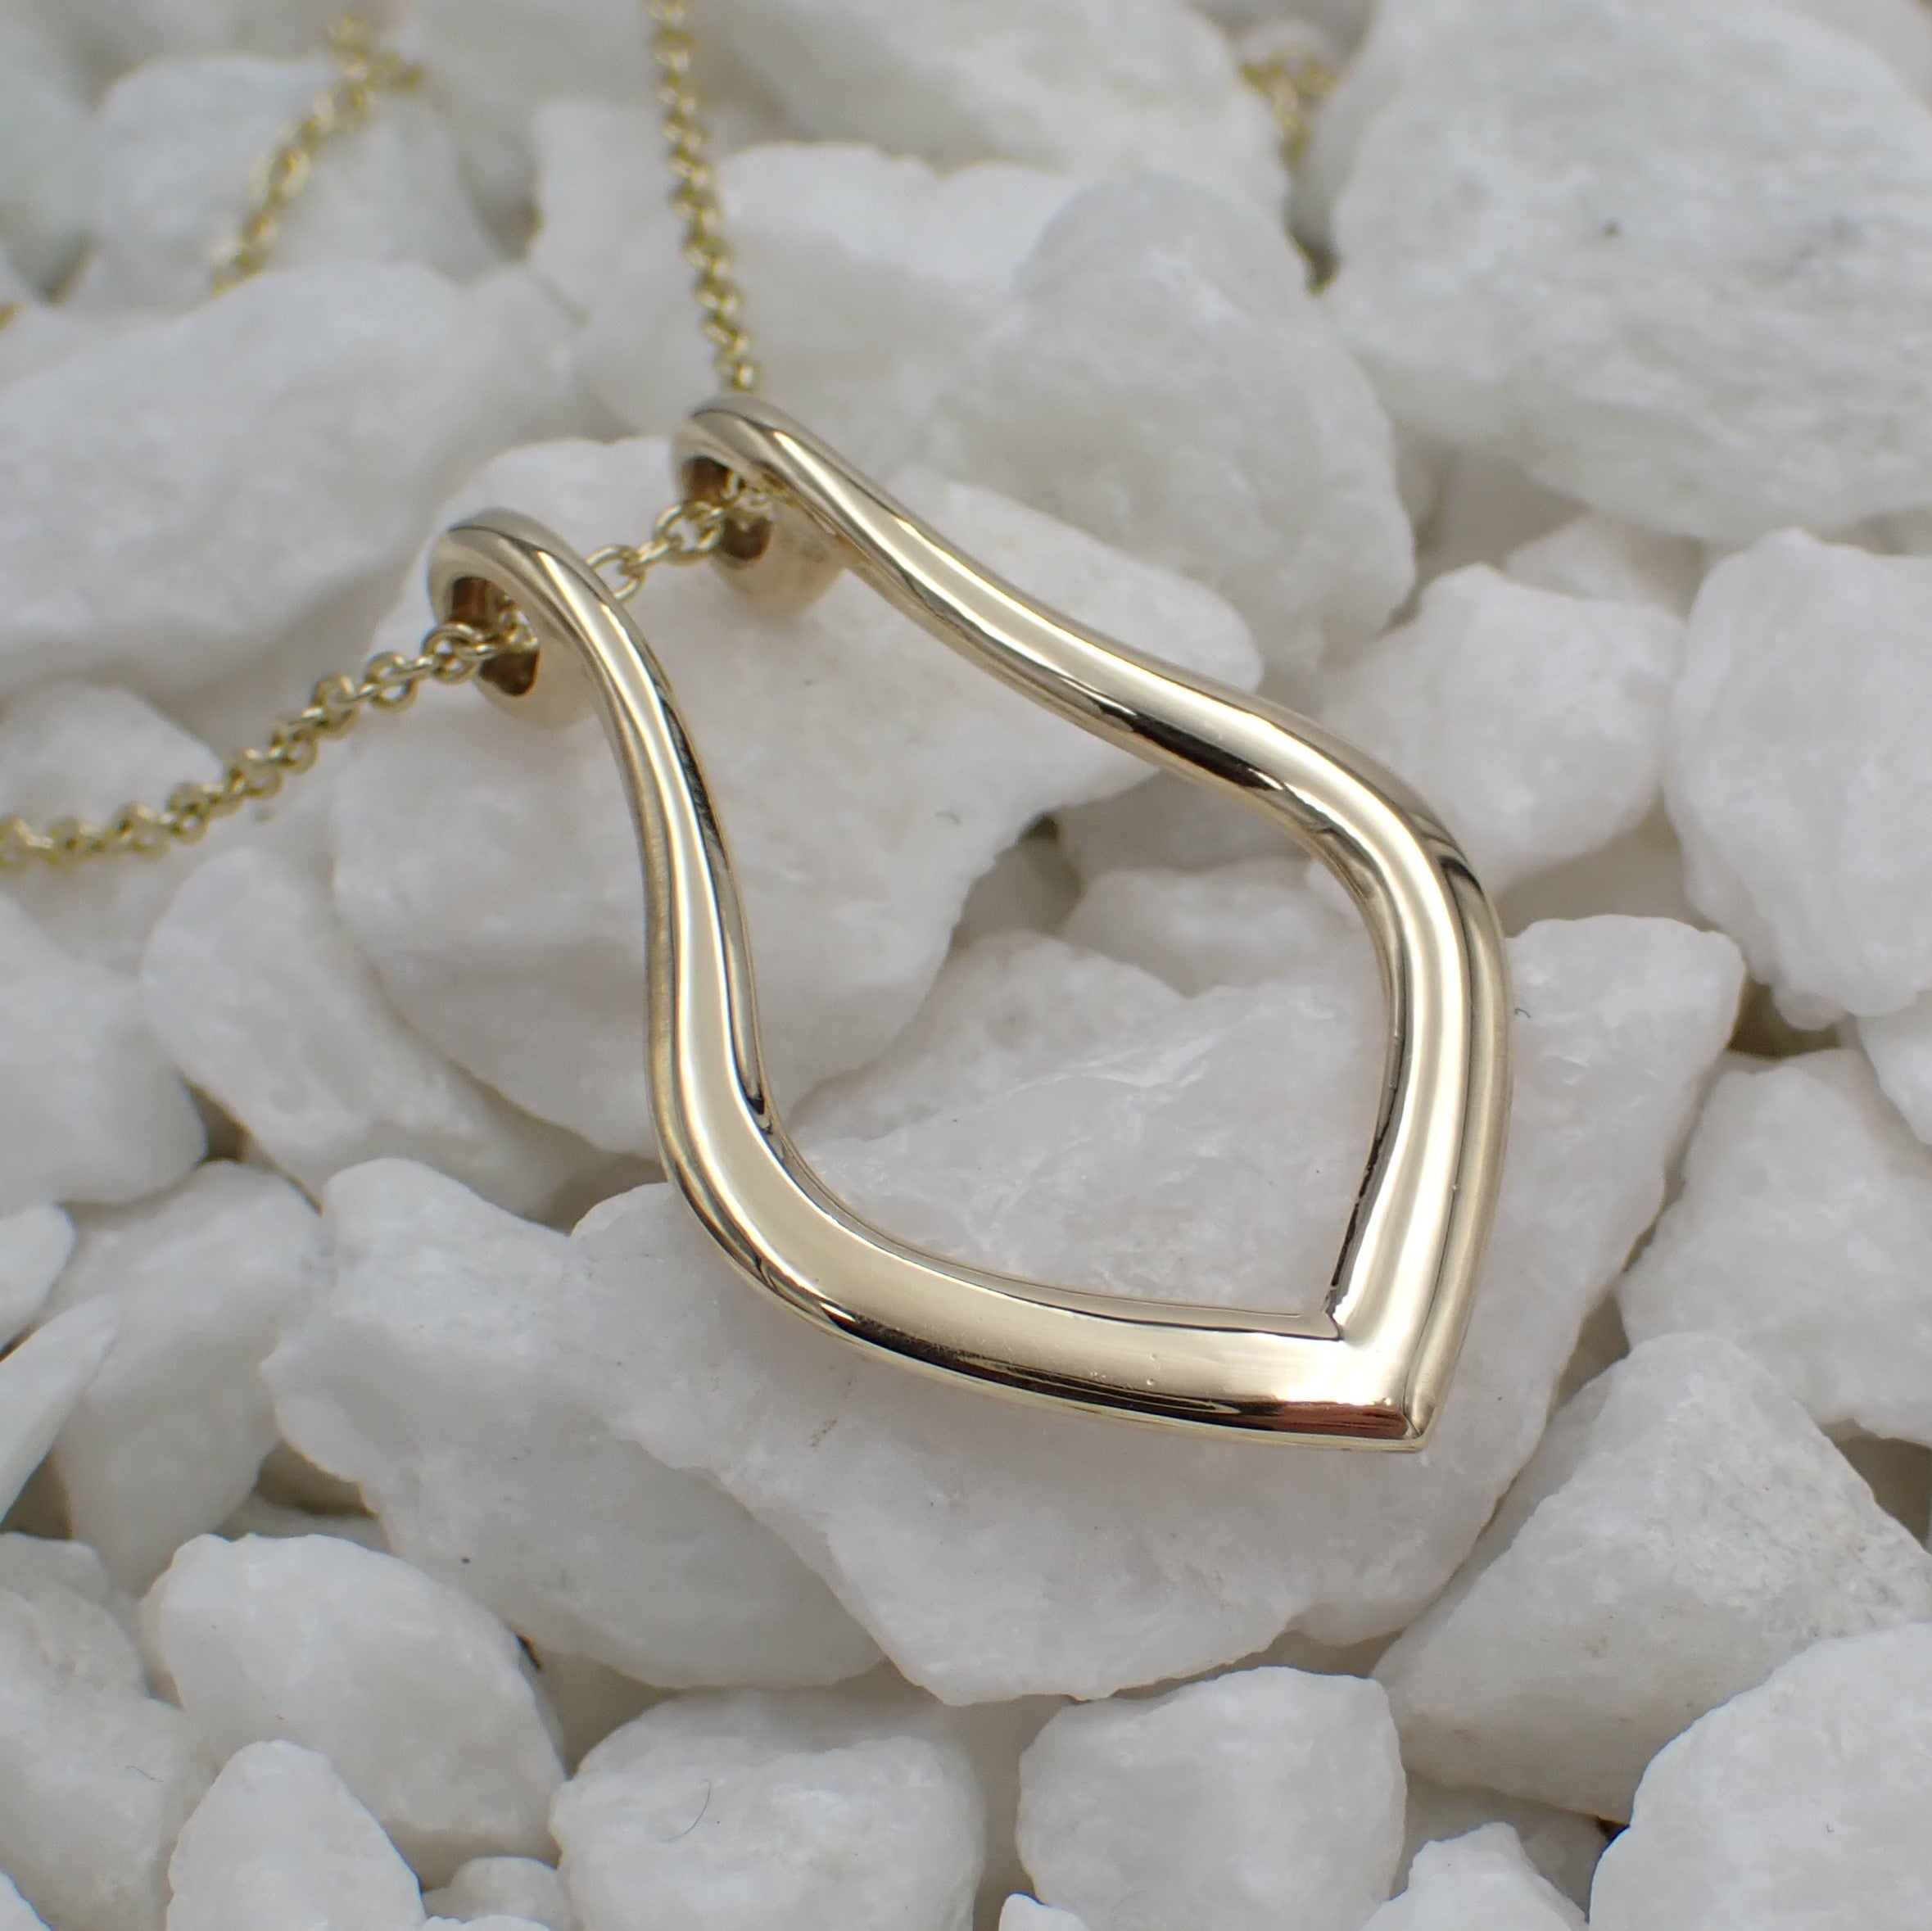 Ring Holder Necklace - Eden and Co | Online Store SA